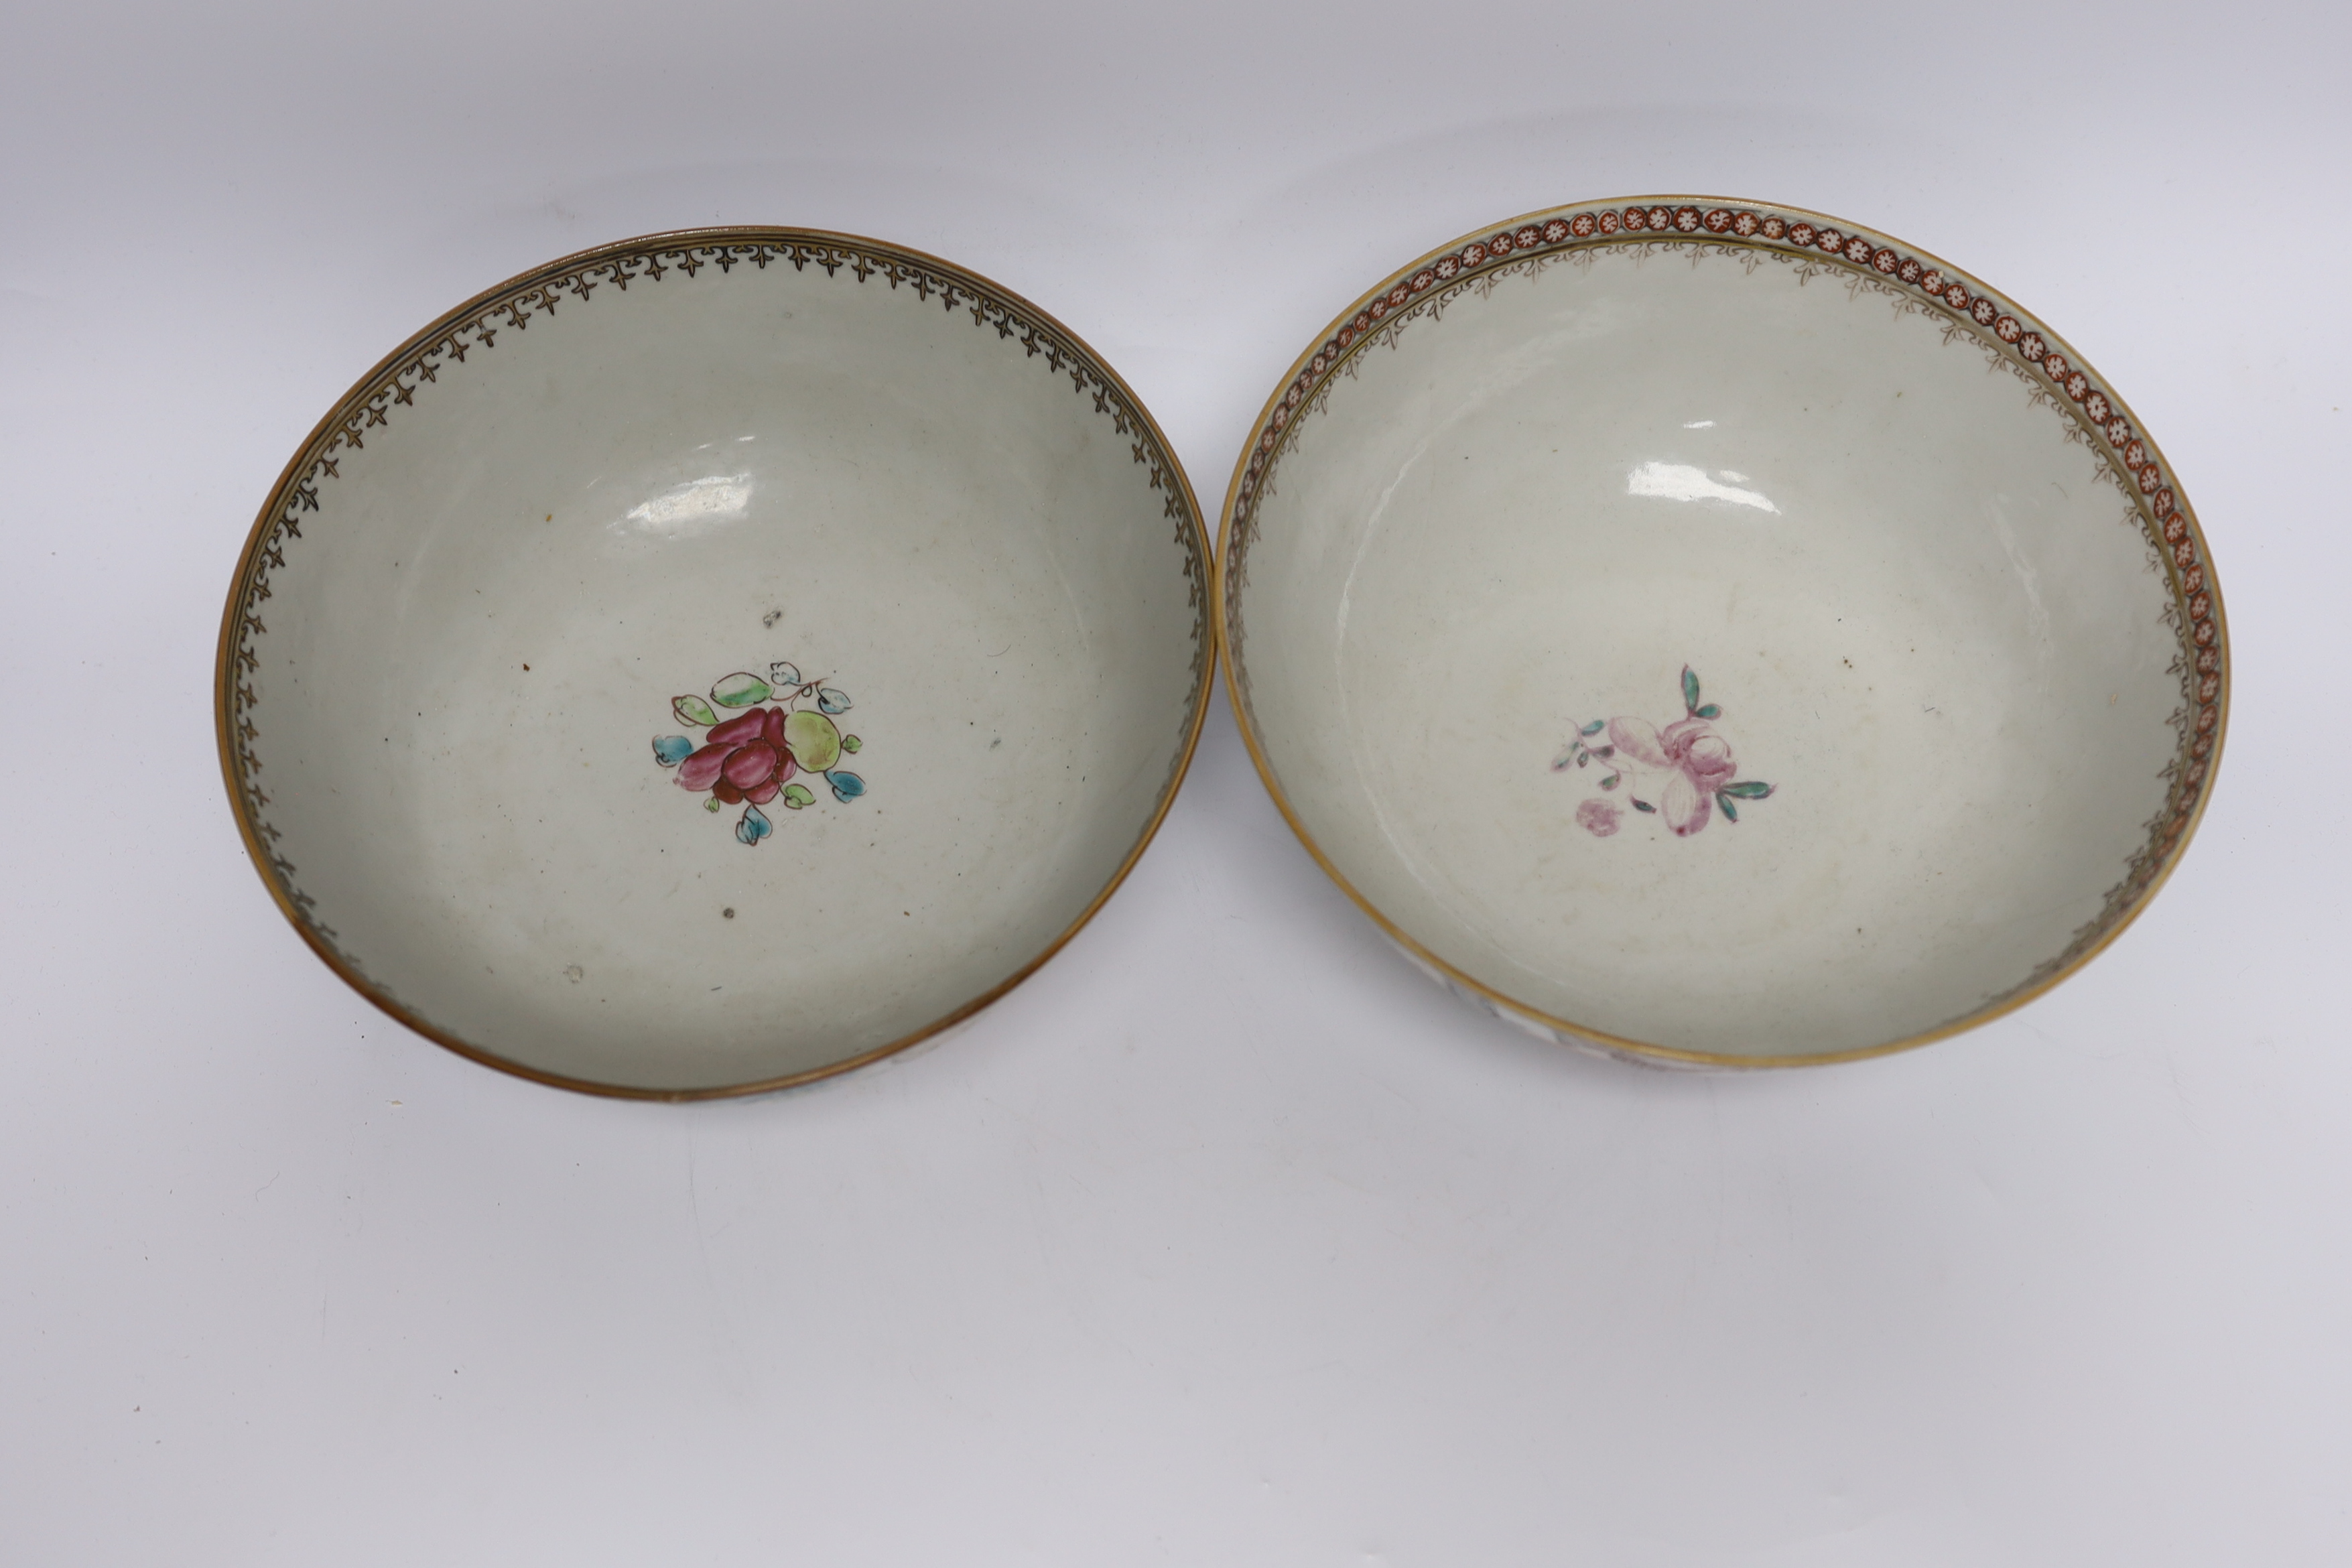 Two 18th century Chinese export famille rose bowls, largest 23cm diameter - Image 4 of 5